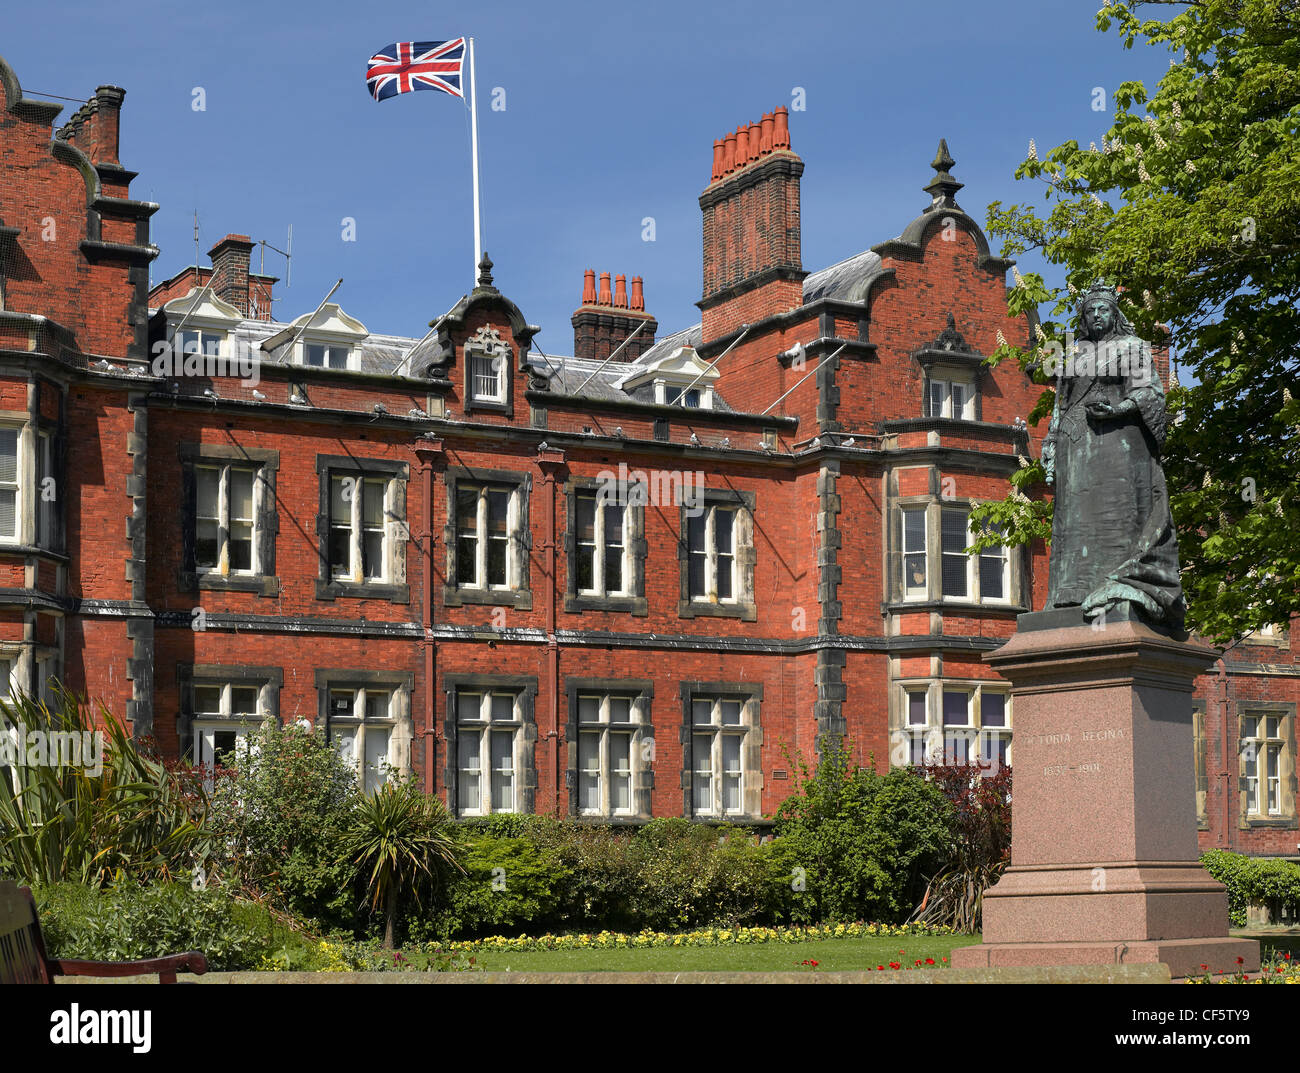 Statue of Queen Victoria outside the Town Hall in St Nicholas Street, South Bay. Stock Photo